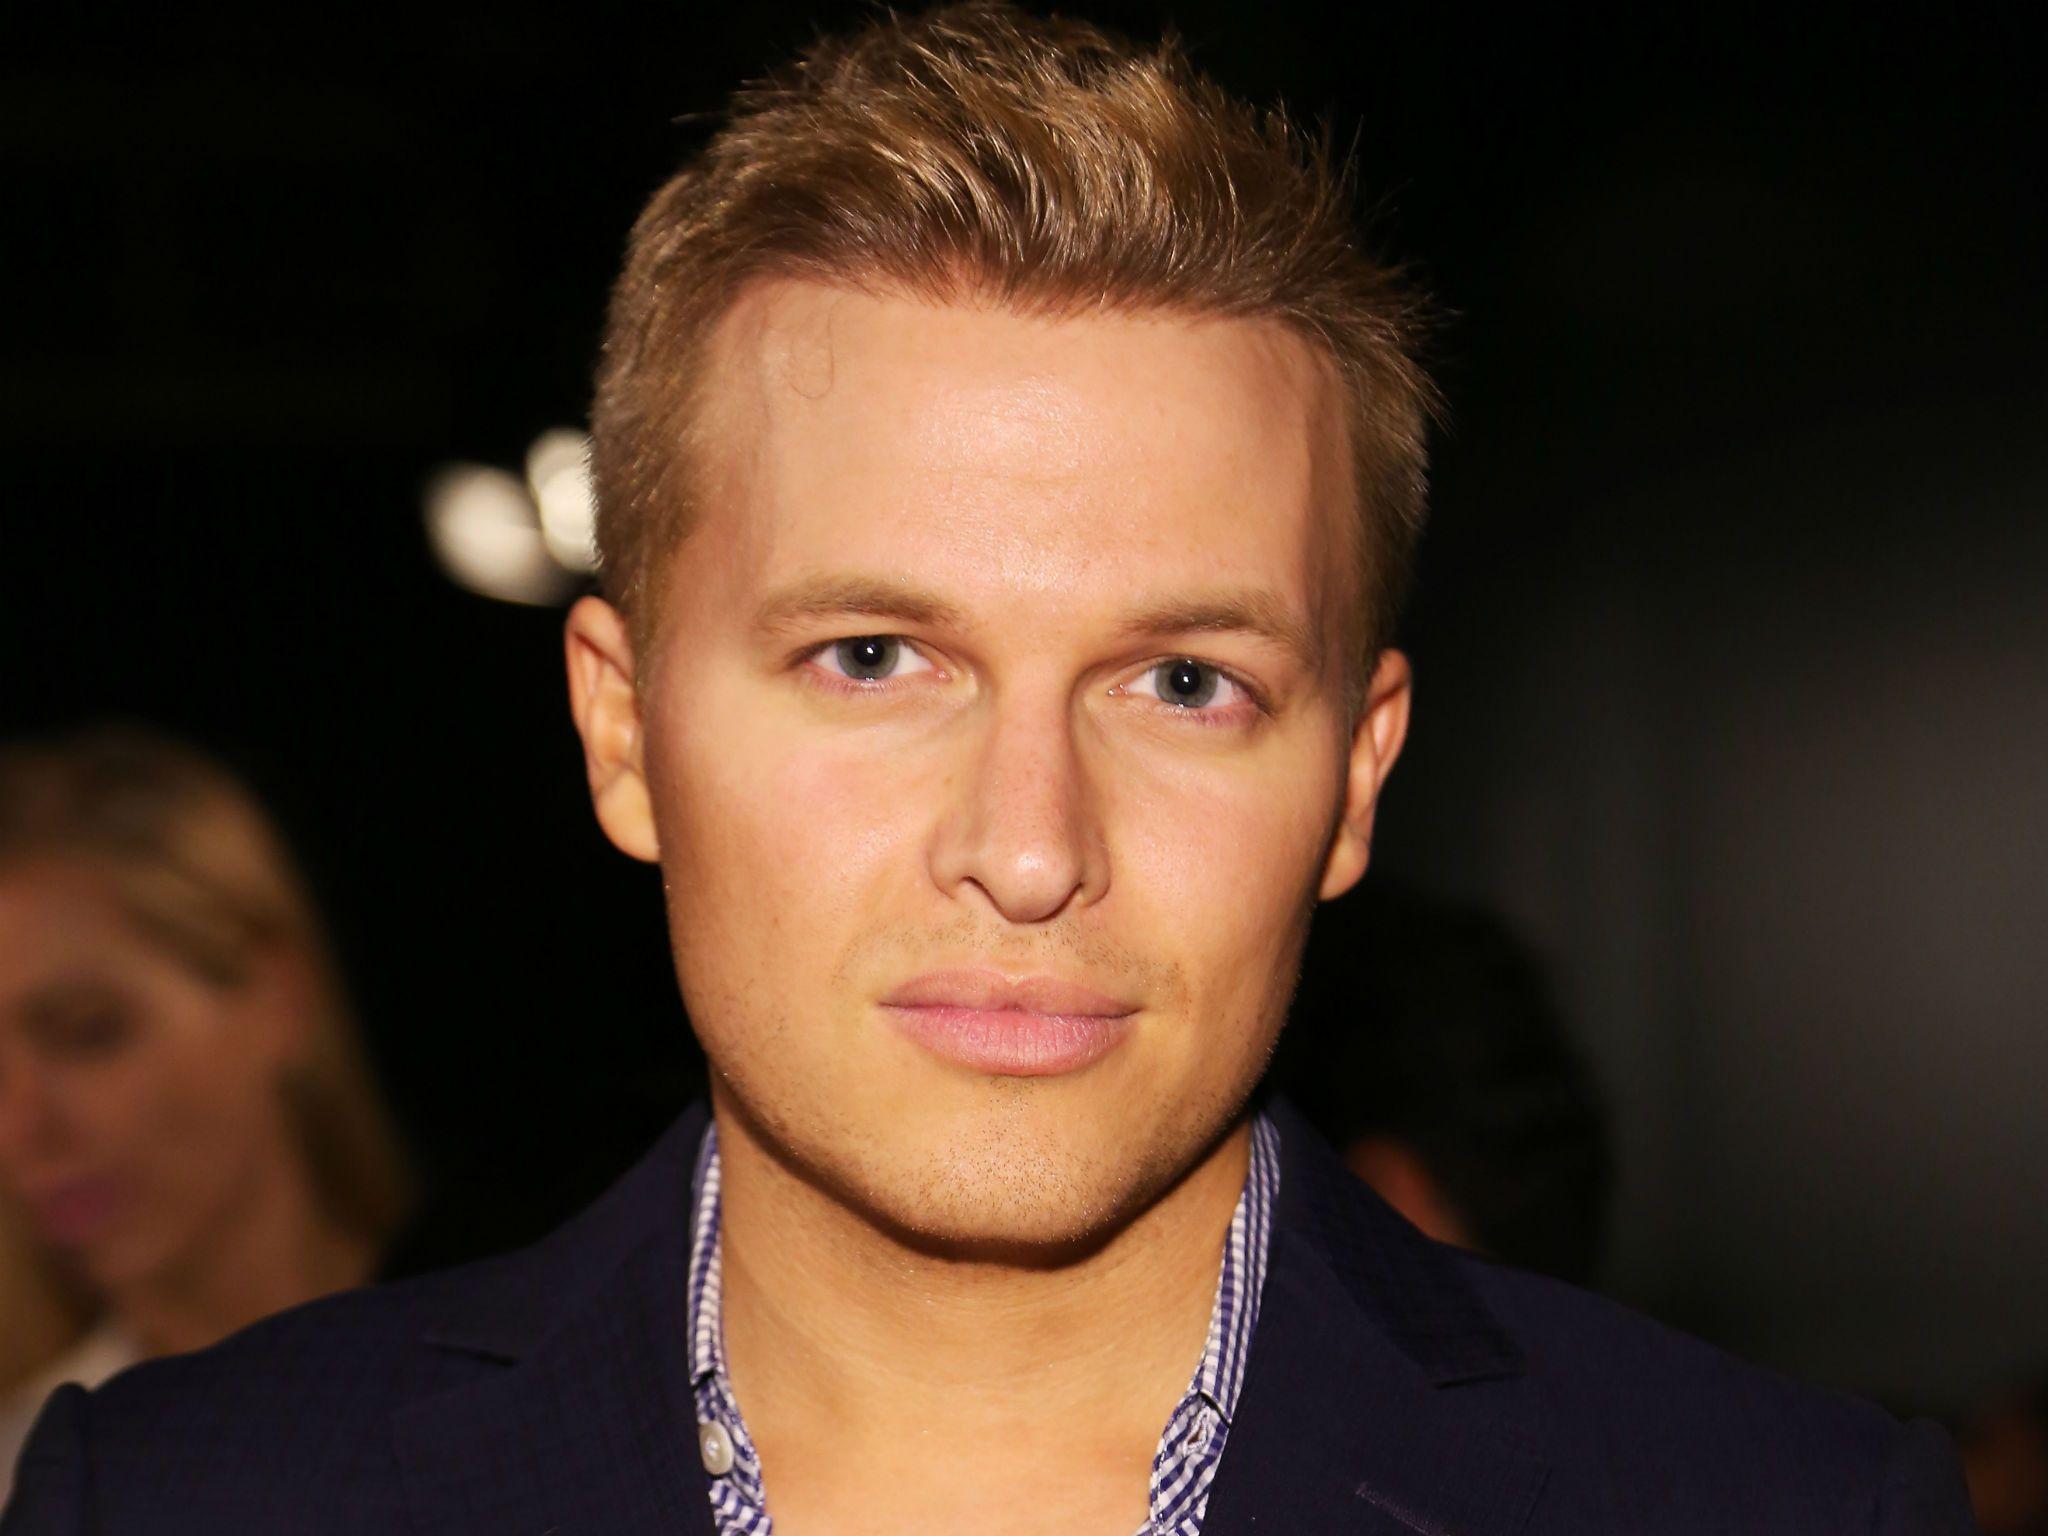 Ronan Farrow writes impassioned essay supporting his sister Dylan's